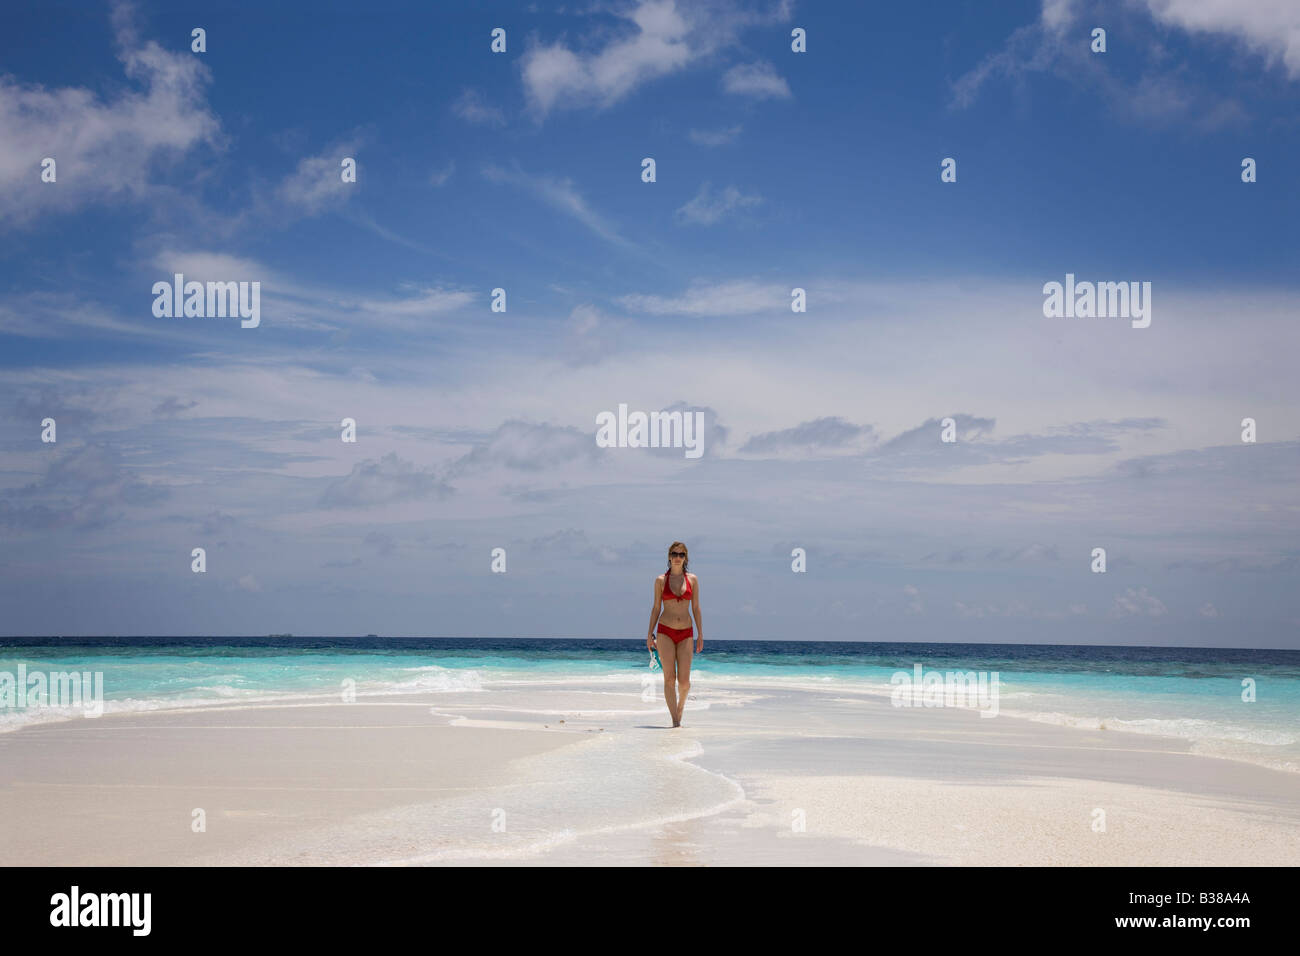 Young woman walking along deserted white sand beach surrounded by tropical waters in Maldives near India Stock Photo